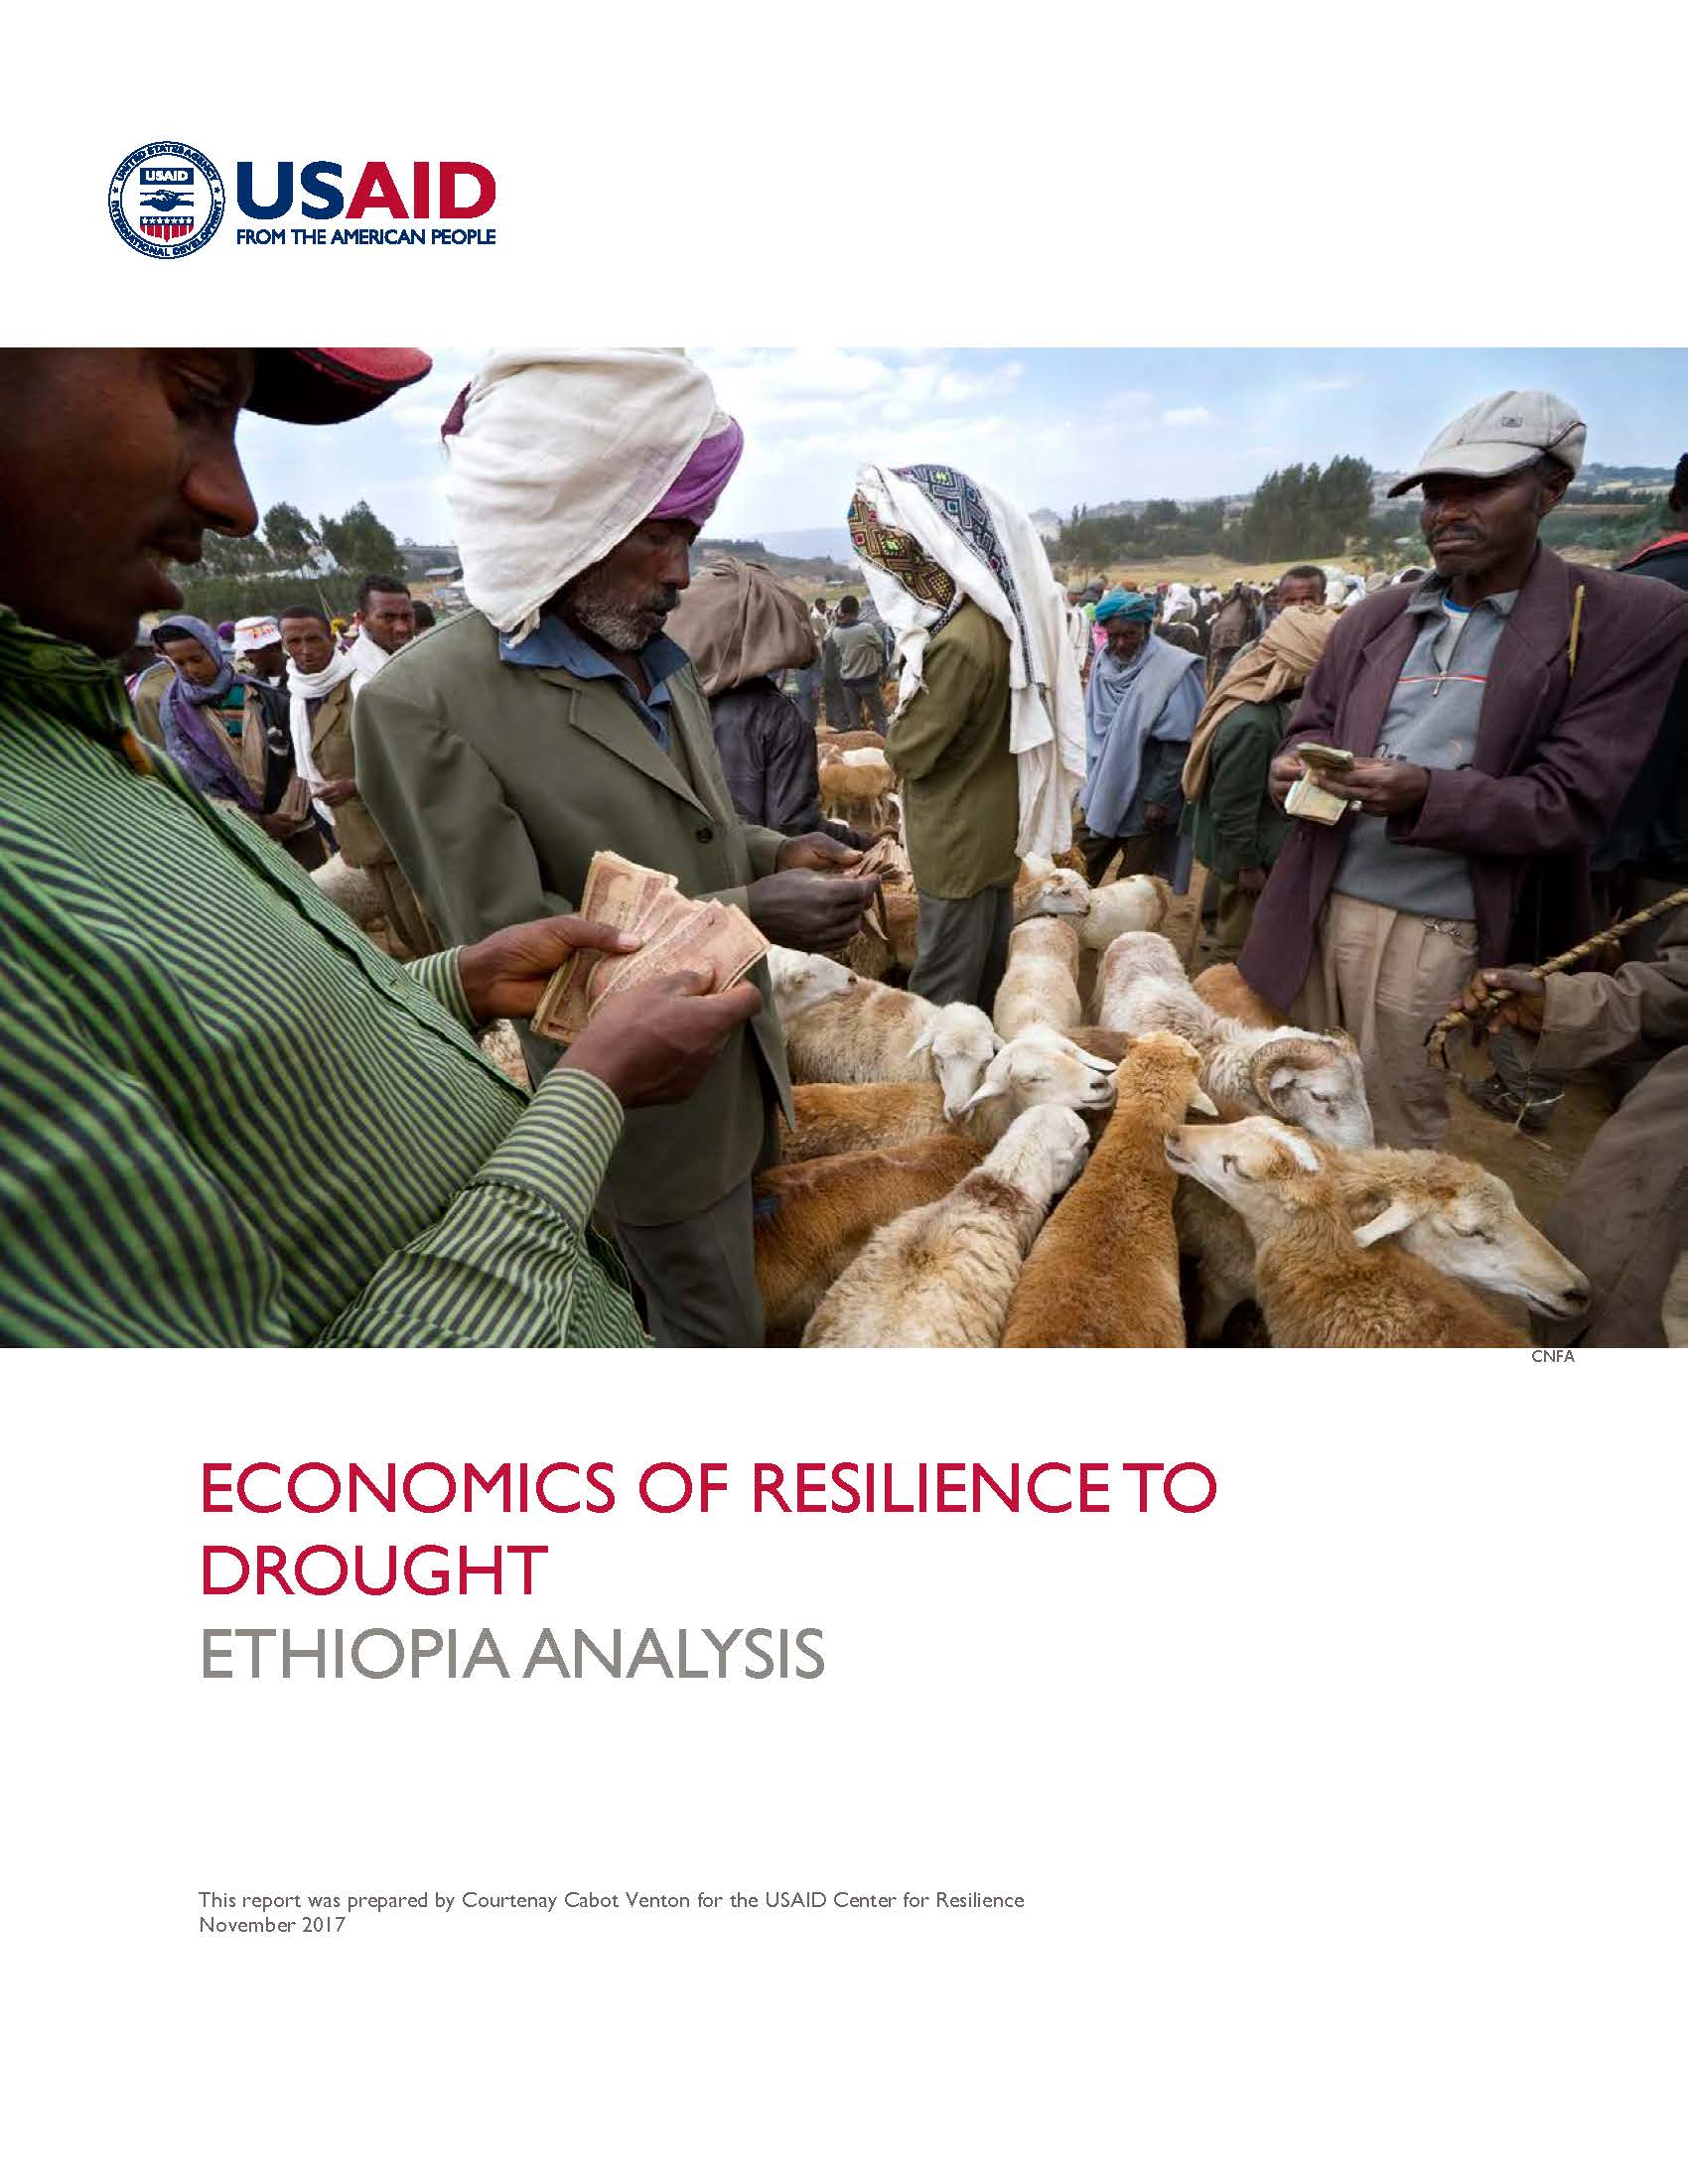 The Economics of Resilience to Drought in Ethiopia